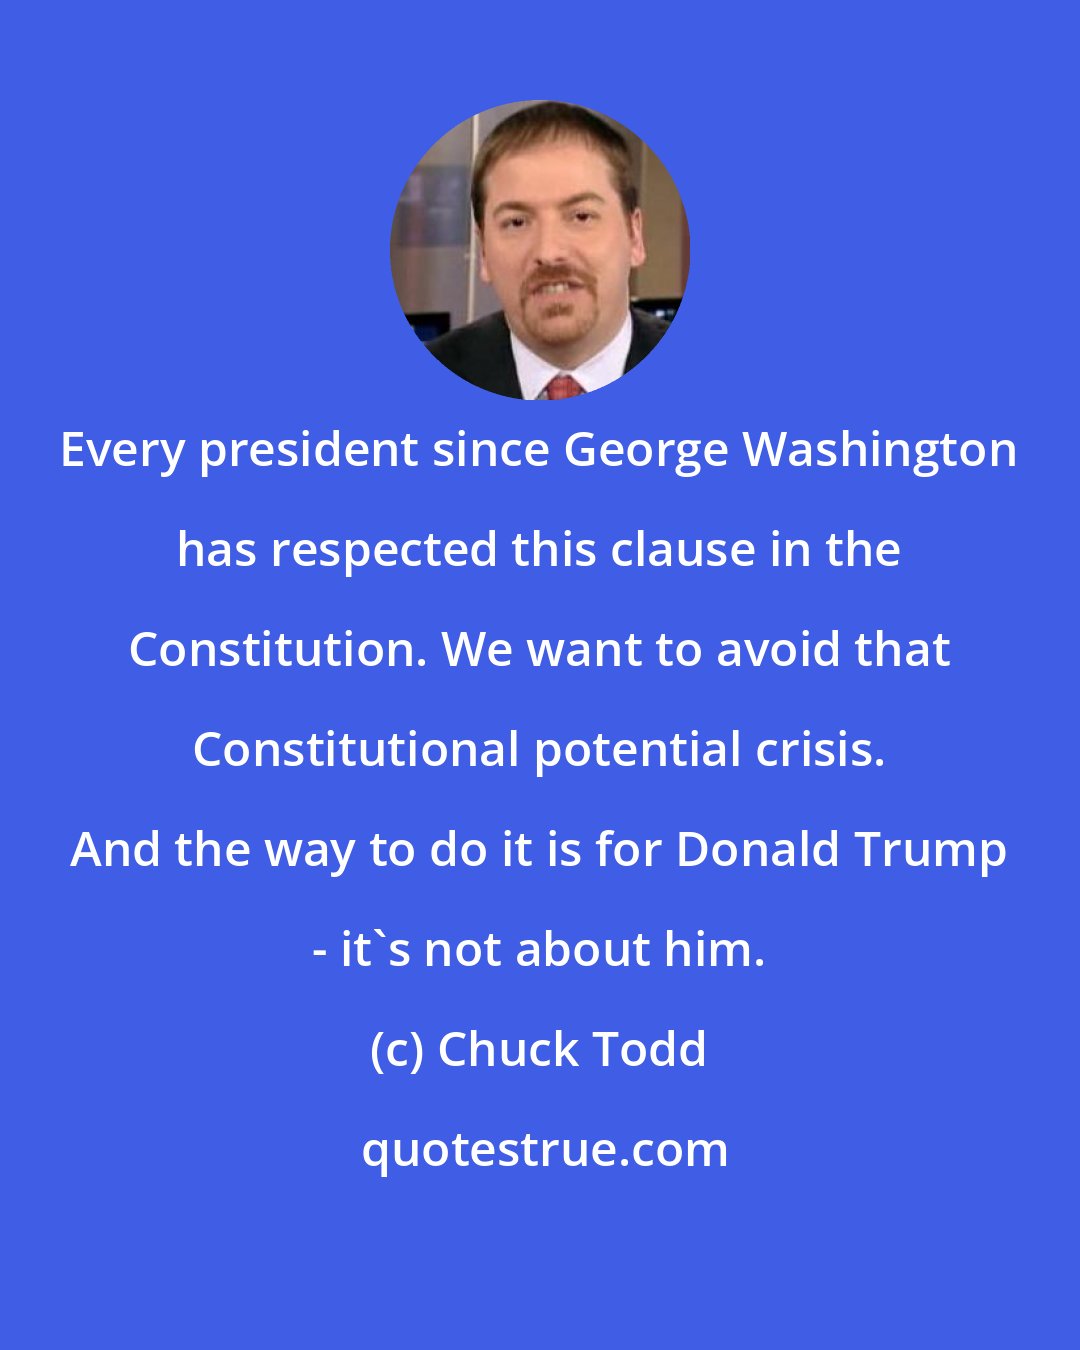 Chuck Todd: Every president since George Washington has respected this clause in the Constitution. We want to avoid that Constitutional potential crisis. And the way to do it is for Donald Trump - it`s not about him.